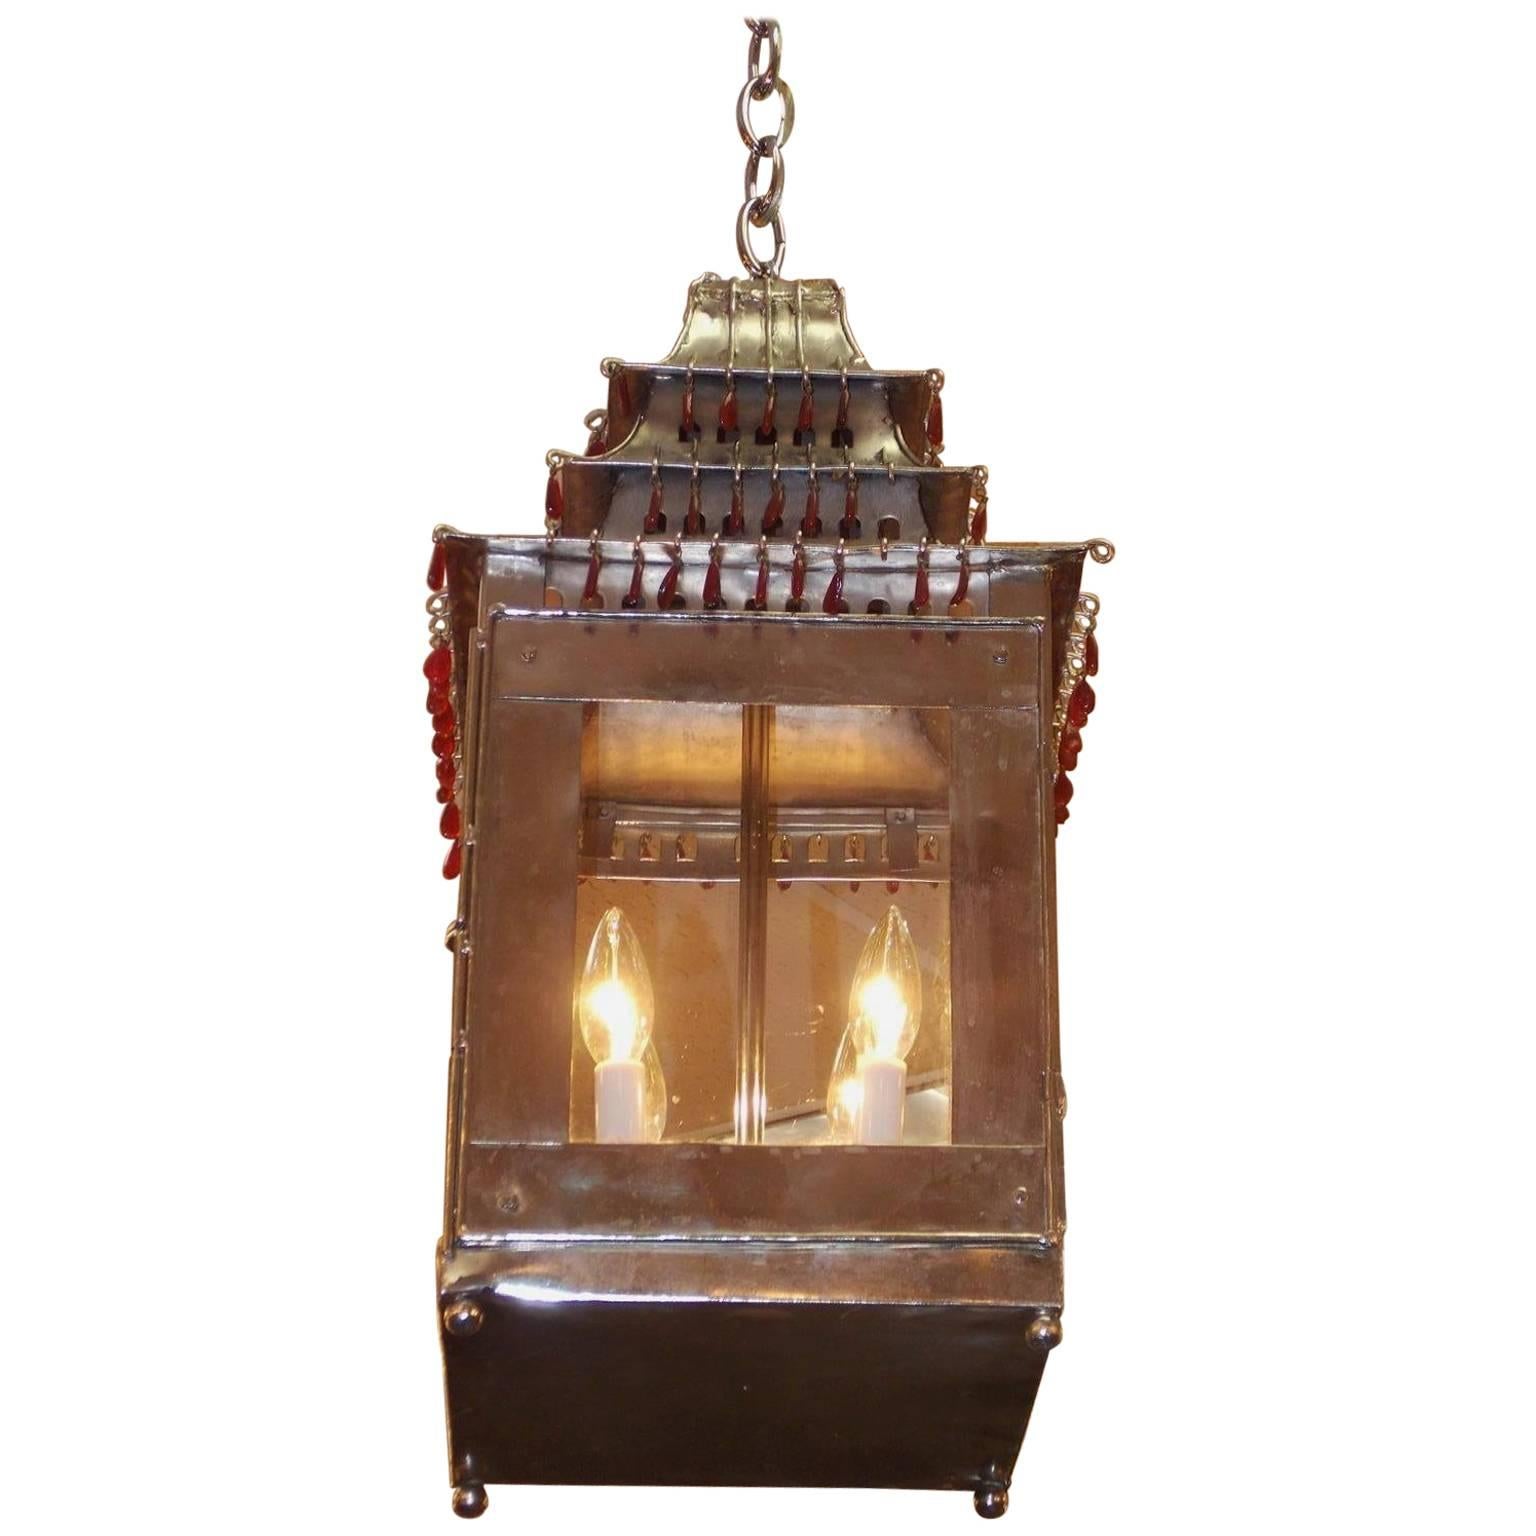 French Tin and Silver Hand-Painted Pagoda Hanging Lantern, Circa 1850 For Sale